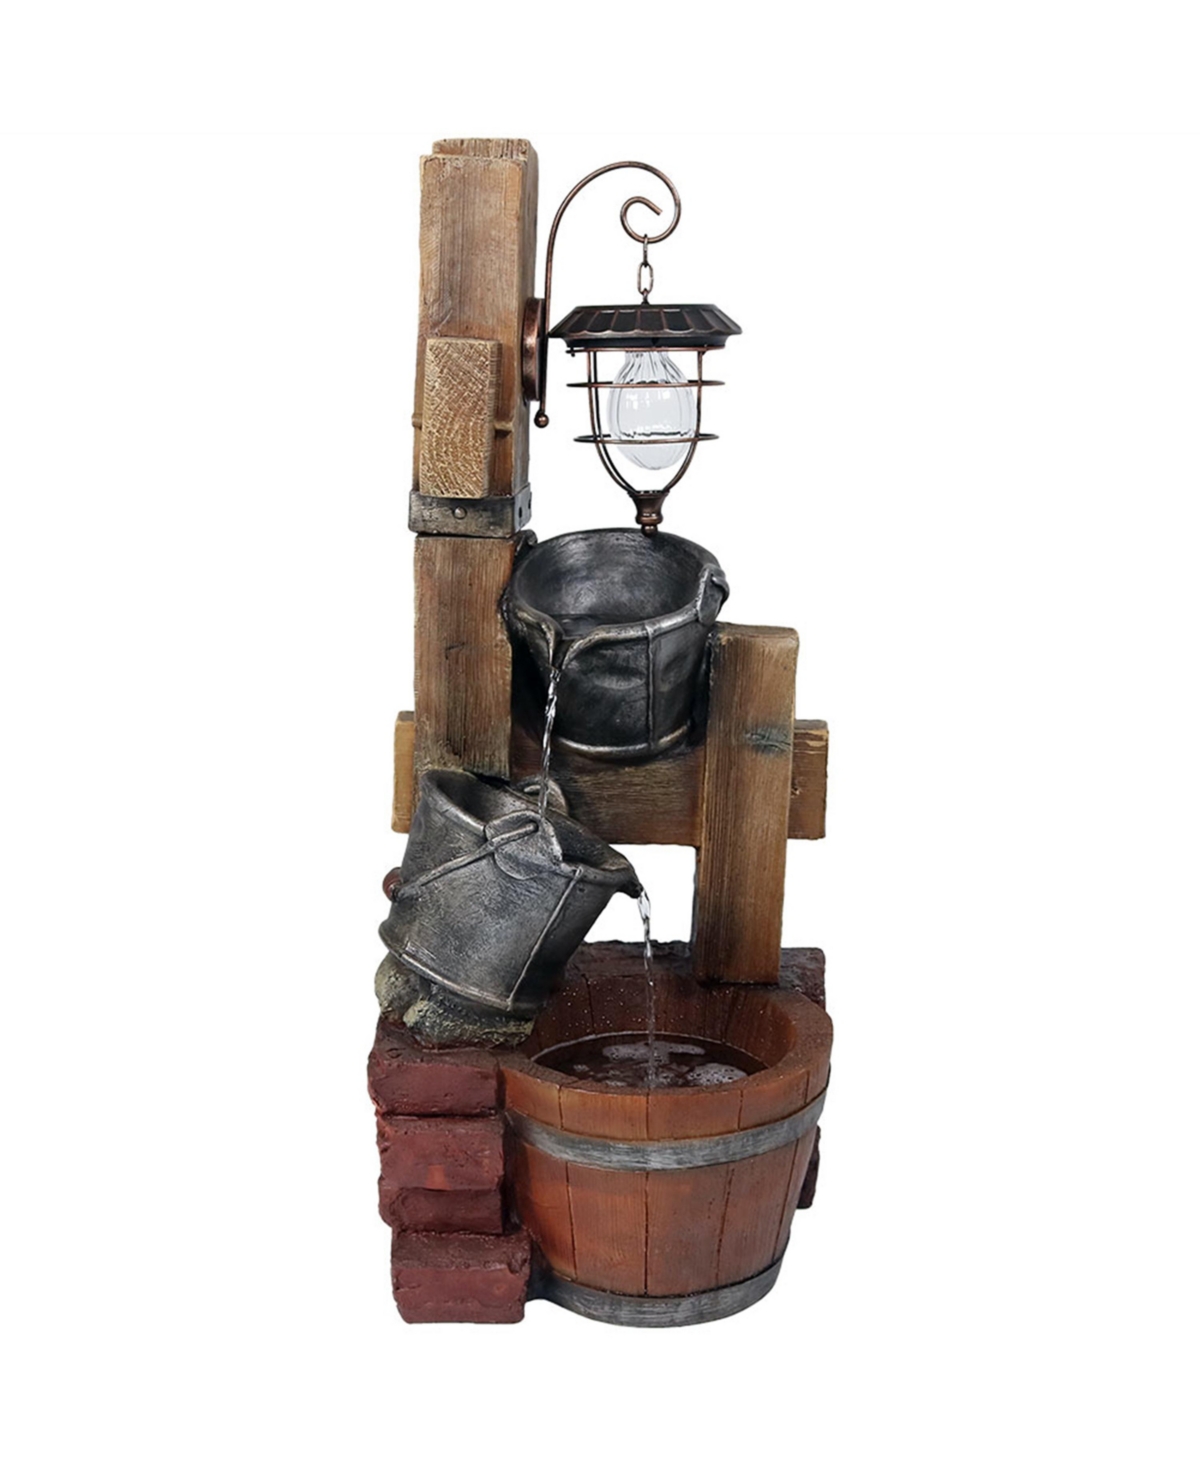 Rustic Pouring Buckets Water Fountain and Solar Lantern - 34 in - Brown